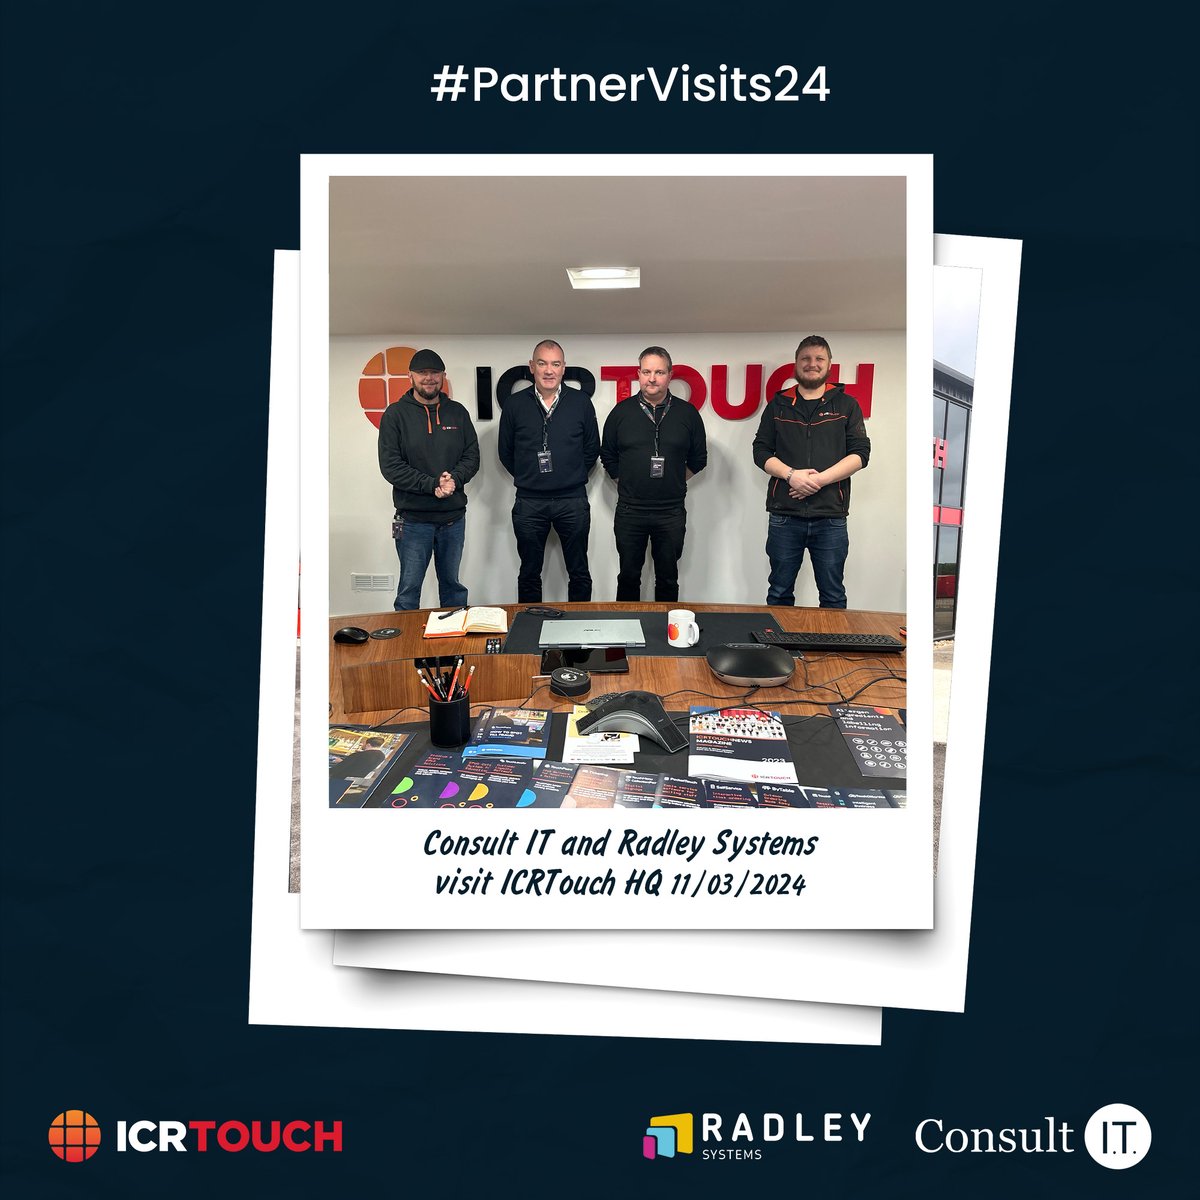 After a successful time at Hospitality Expo in Dublin, Consult IT & Radley Systems came to our HQ to talk all things ICRTouch! 🇮🇪🙌

#weareICRTouch #partnervisits24